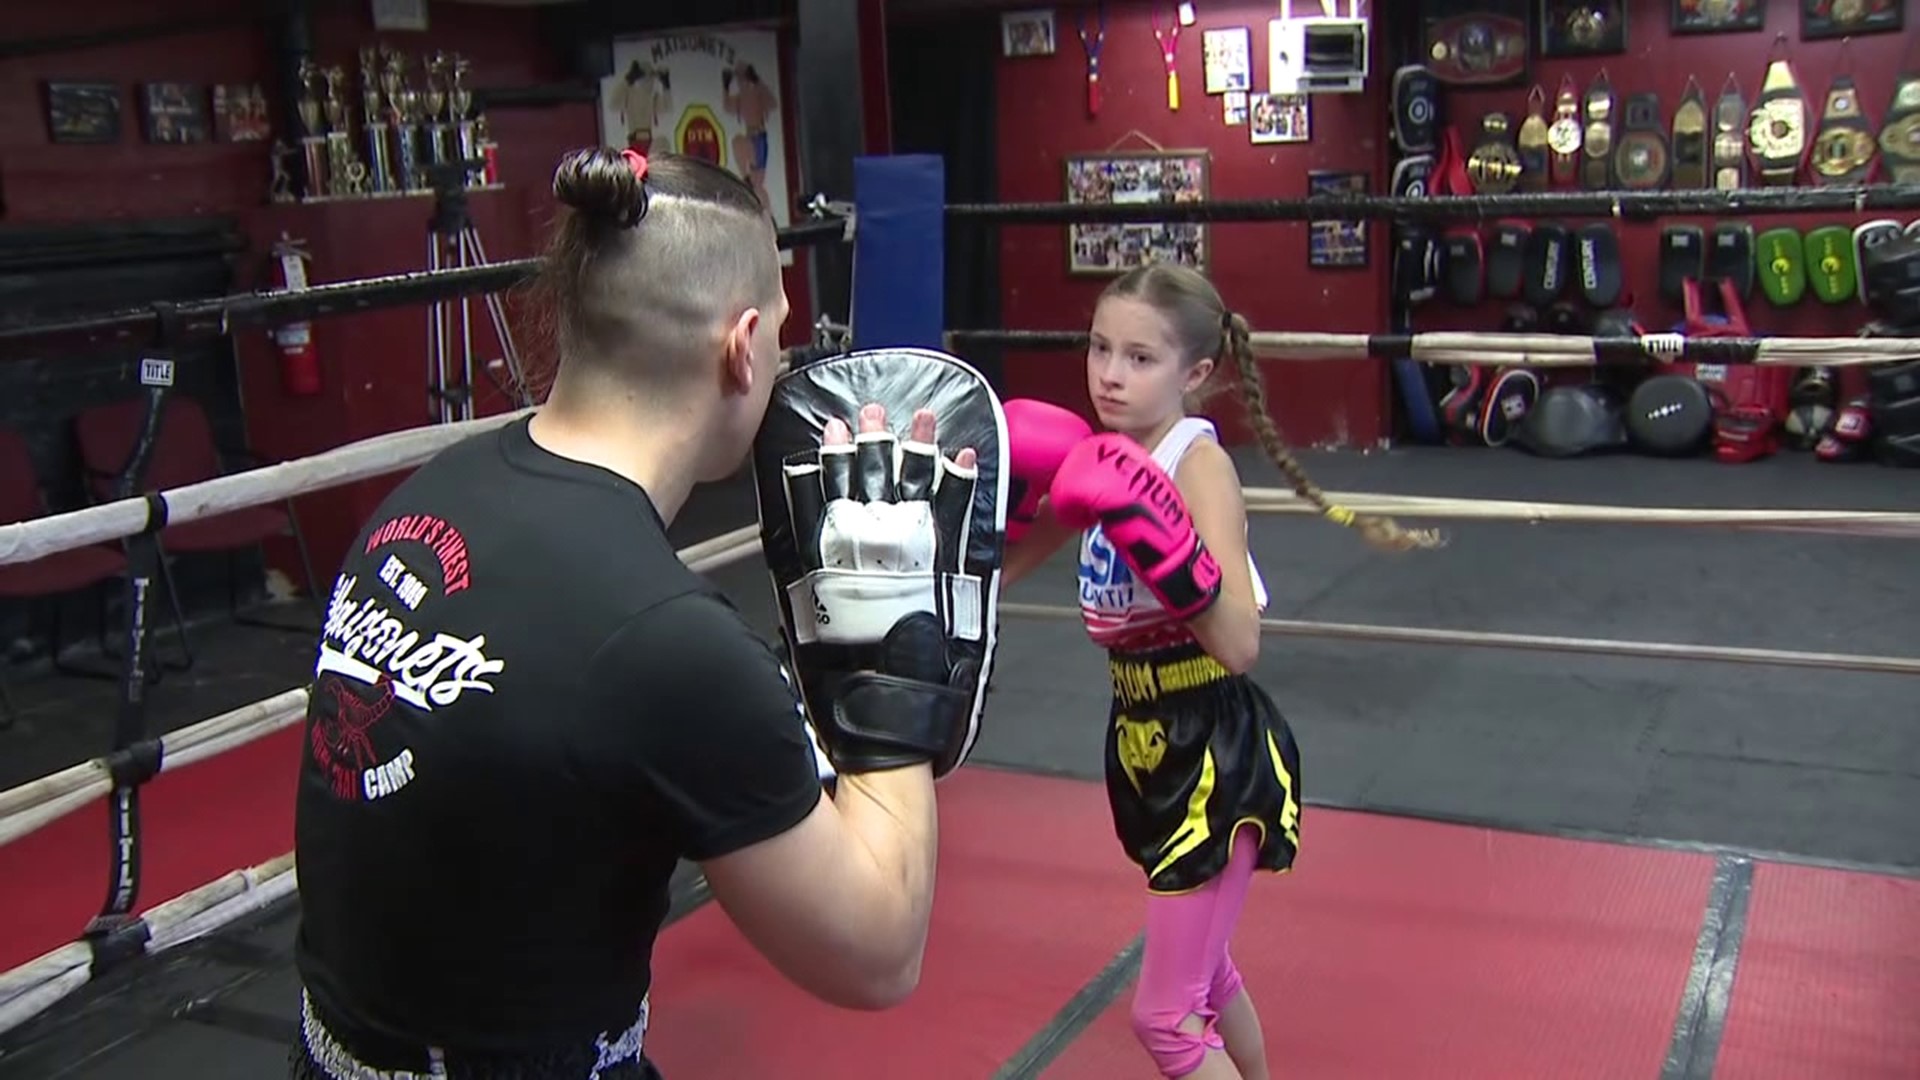 In the Poconos, a girl's fighting skills have earned her a spot on Team USA.